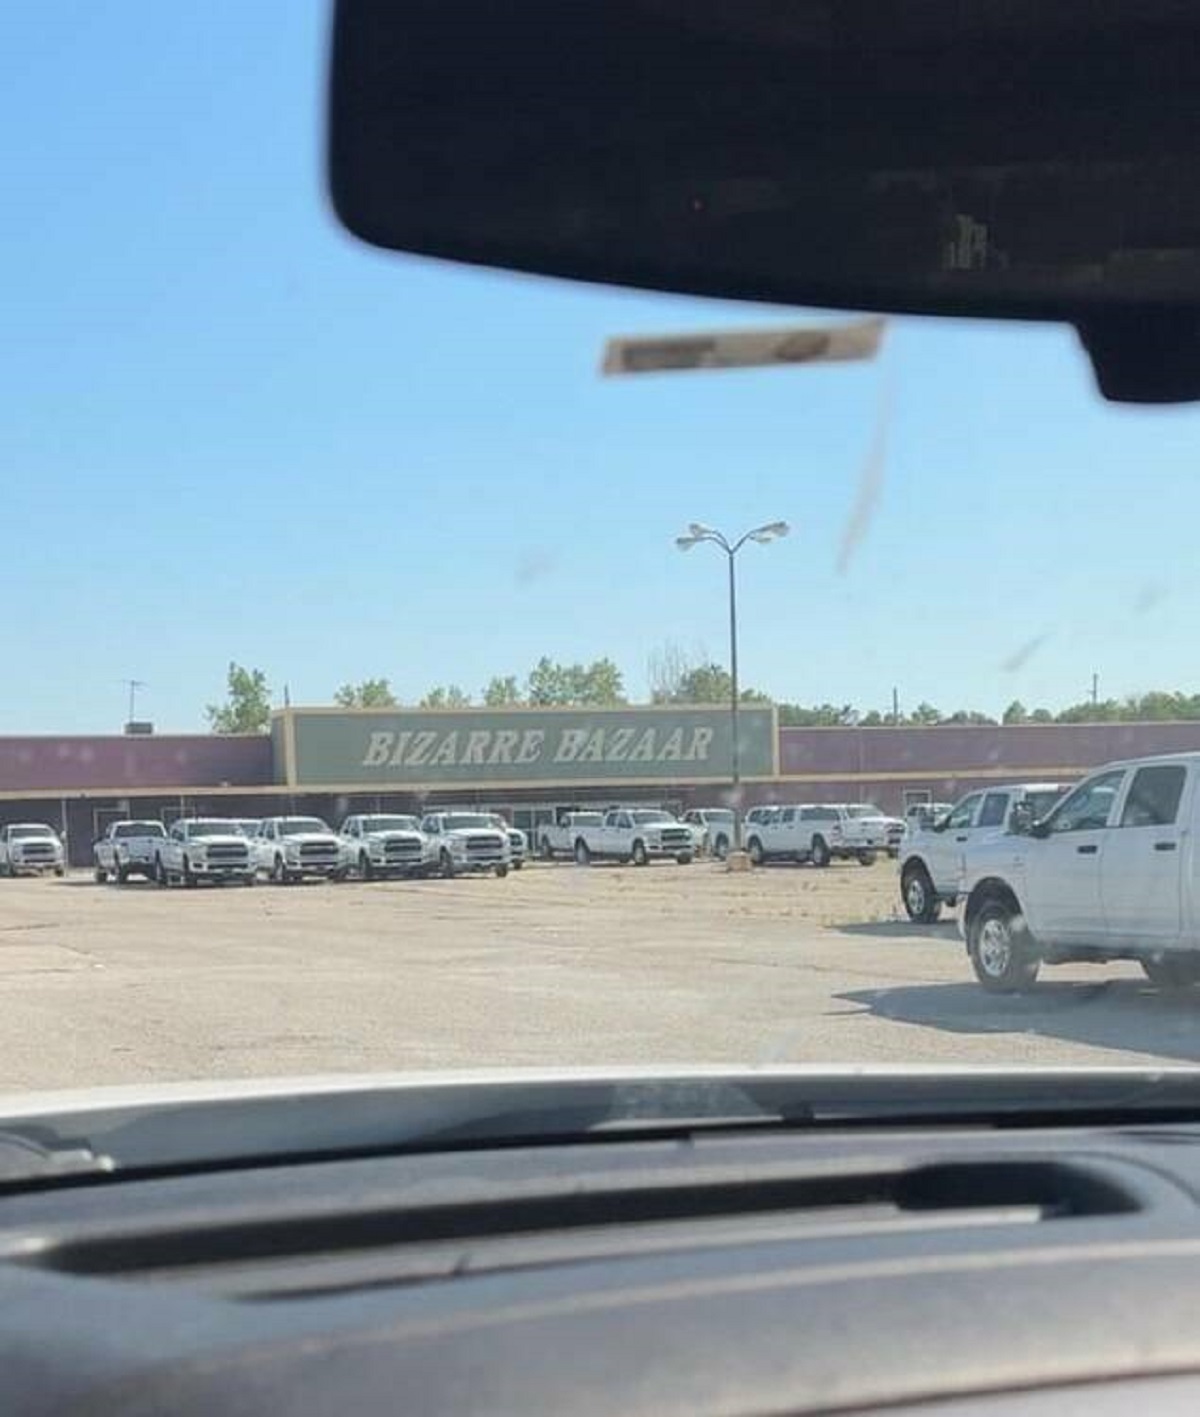 "Abandoned Parking lot with hundred of the exact same truck"